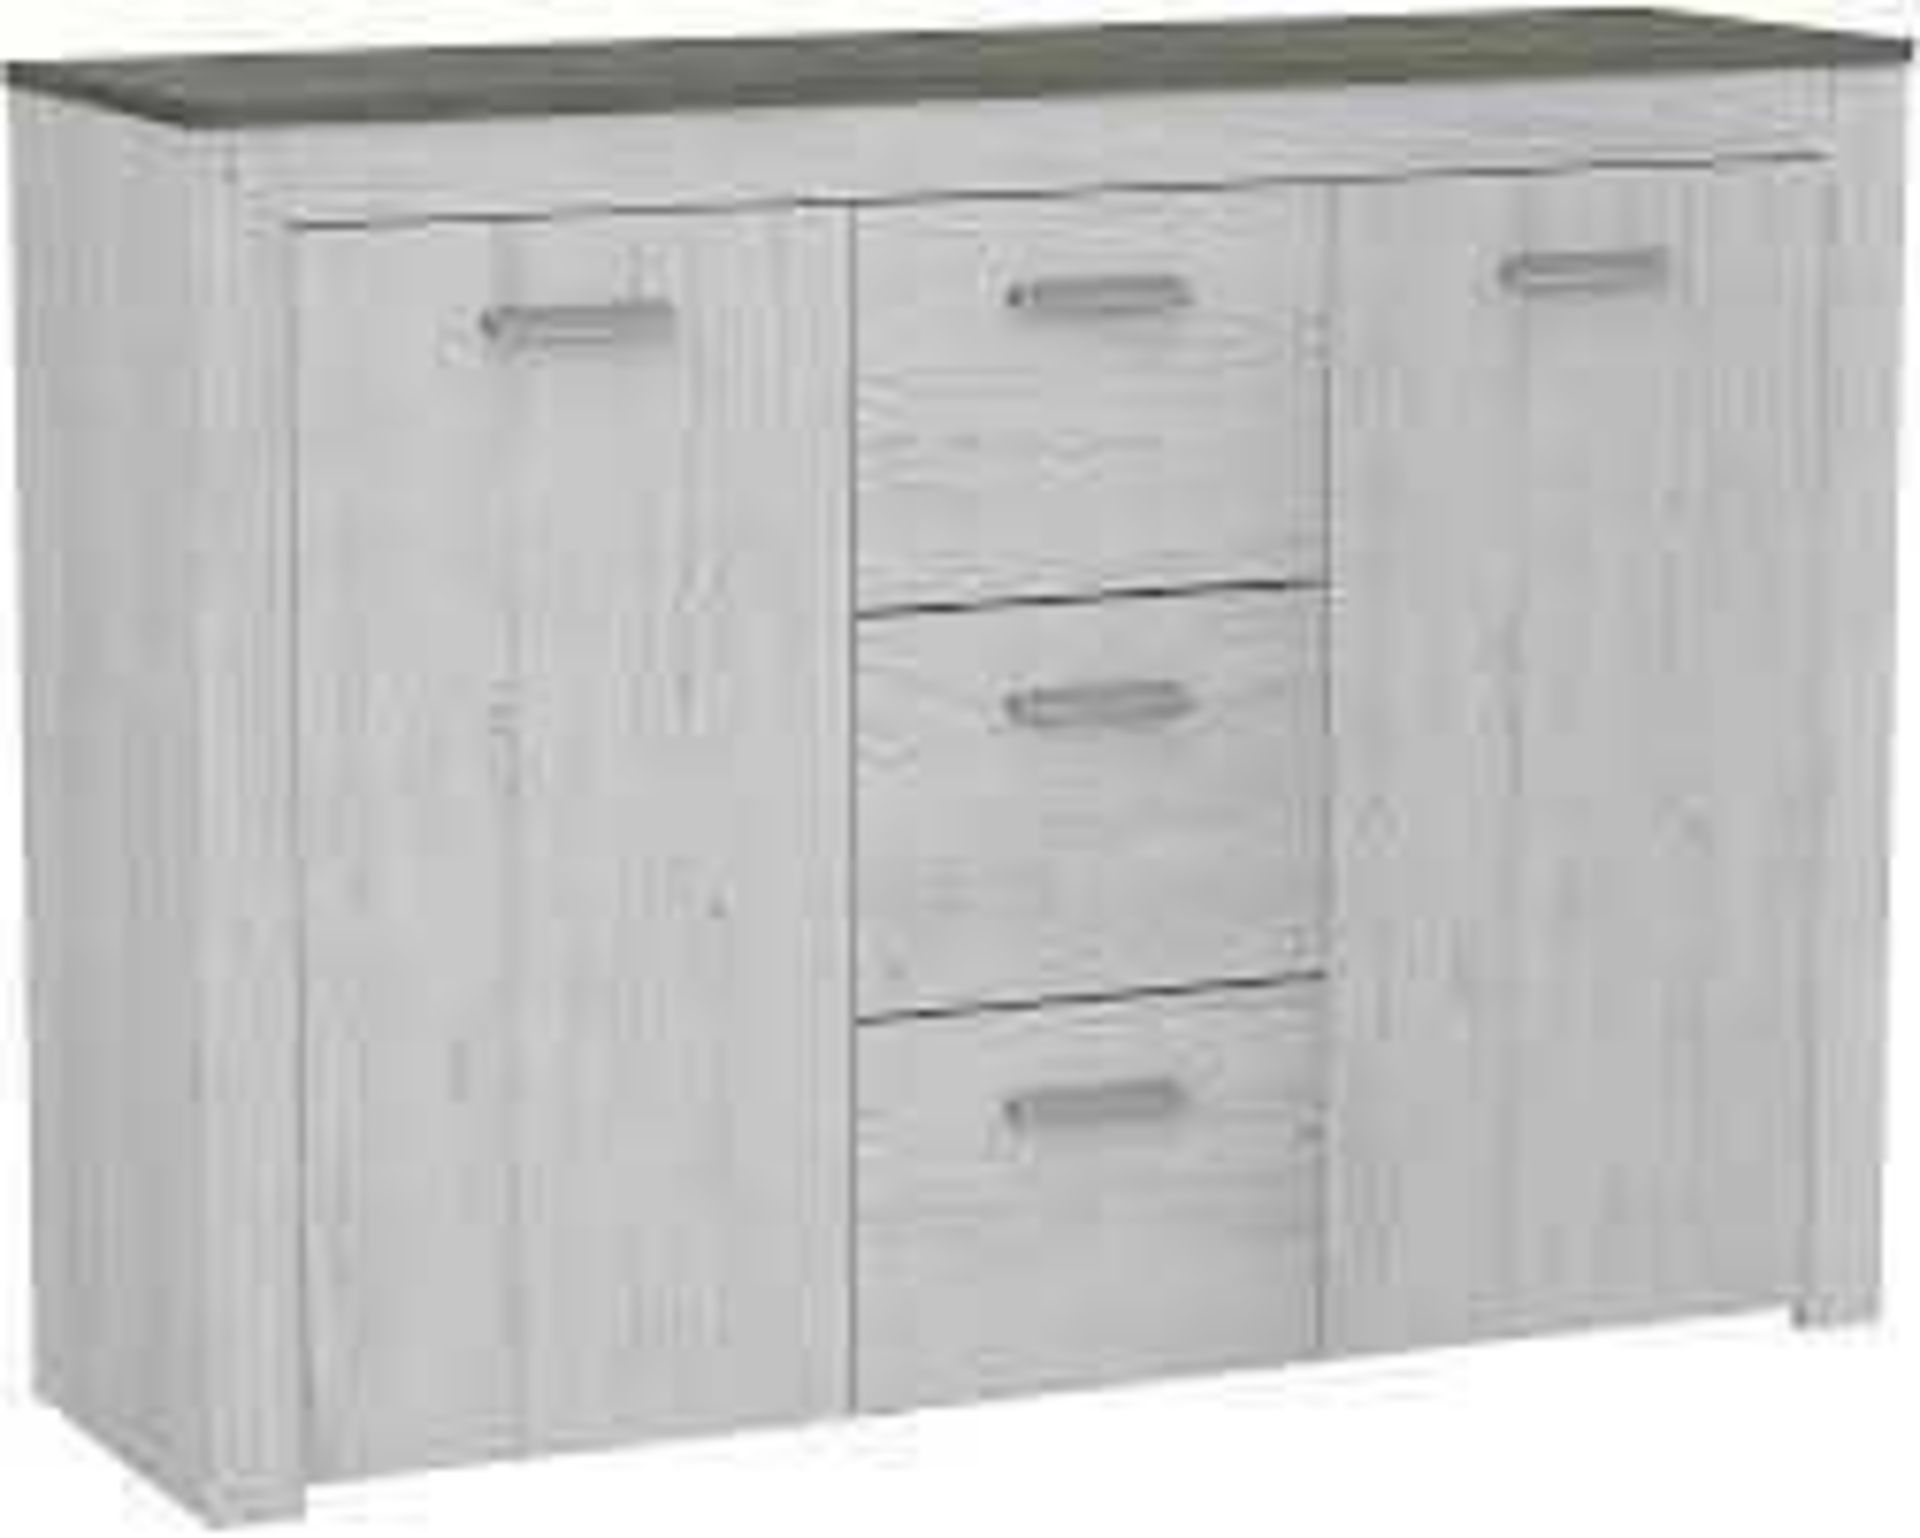 RRP £200 Boxed Inter Link Eboli 19300350 Dresser With 3 Doors And 2 Drawers Sonoma Oak (Sp)